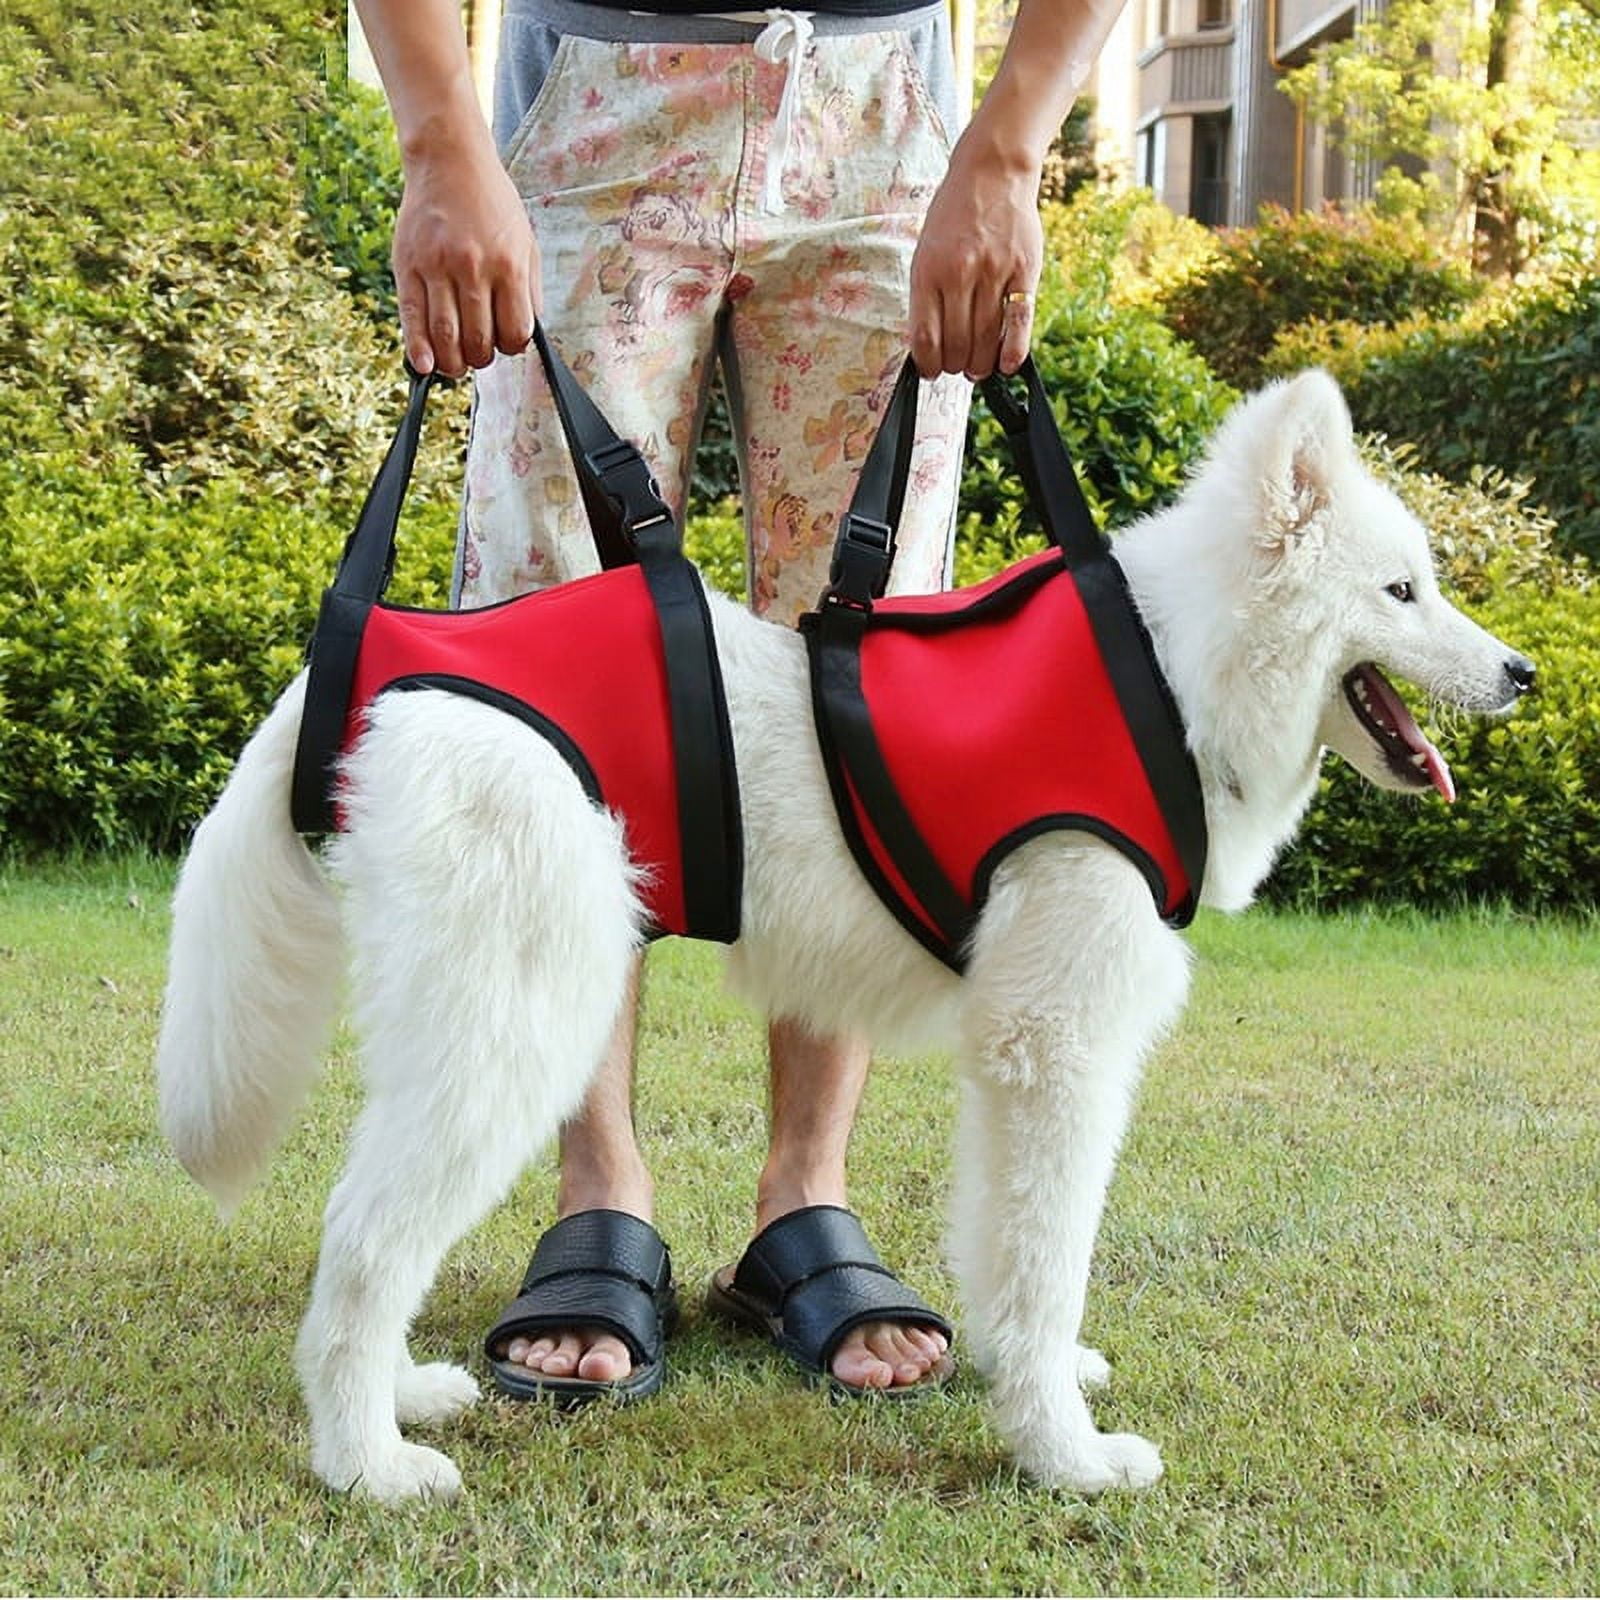 Tureclos Dog Lift Harness Patches Reusable Walking Aid Adjustable Legs Strap Pet Walking Support, Back Legs, M, Size: Back Legs Medium